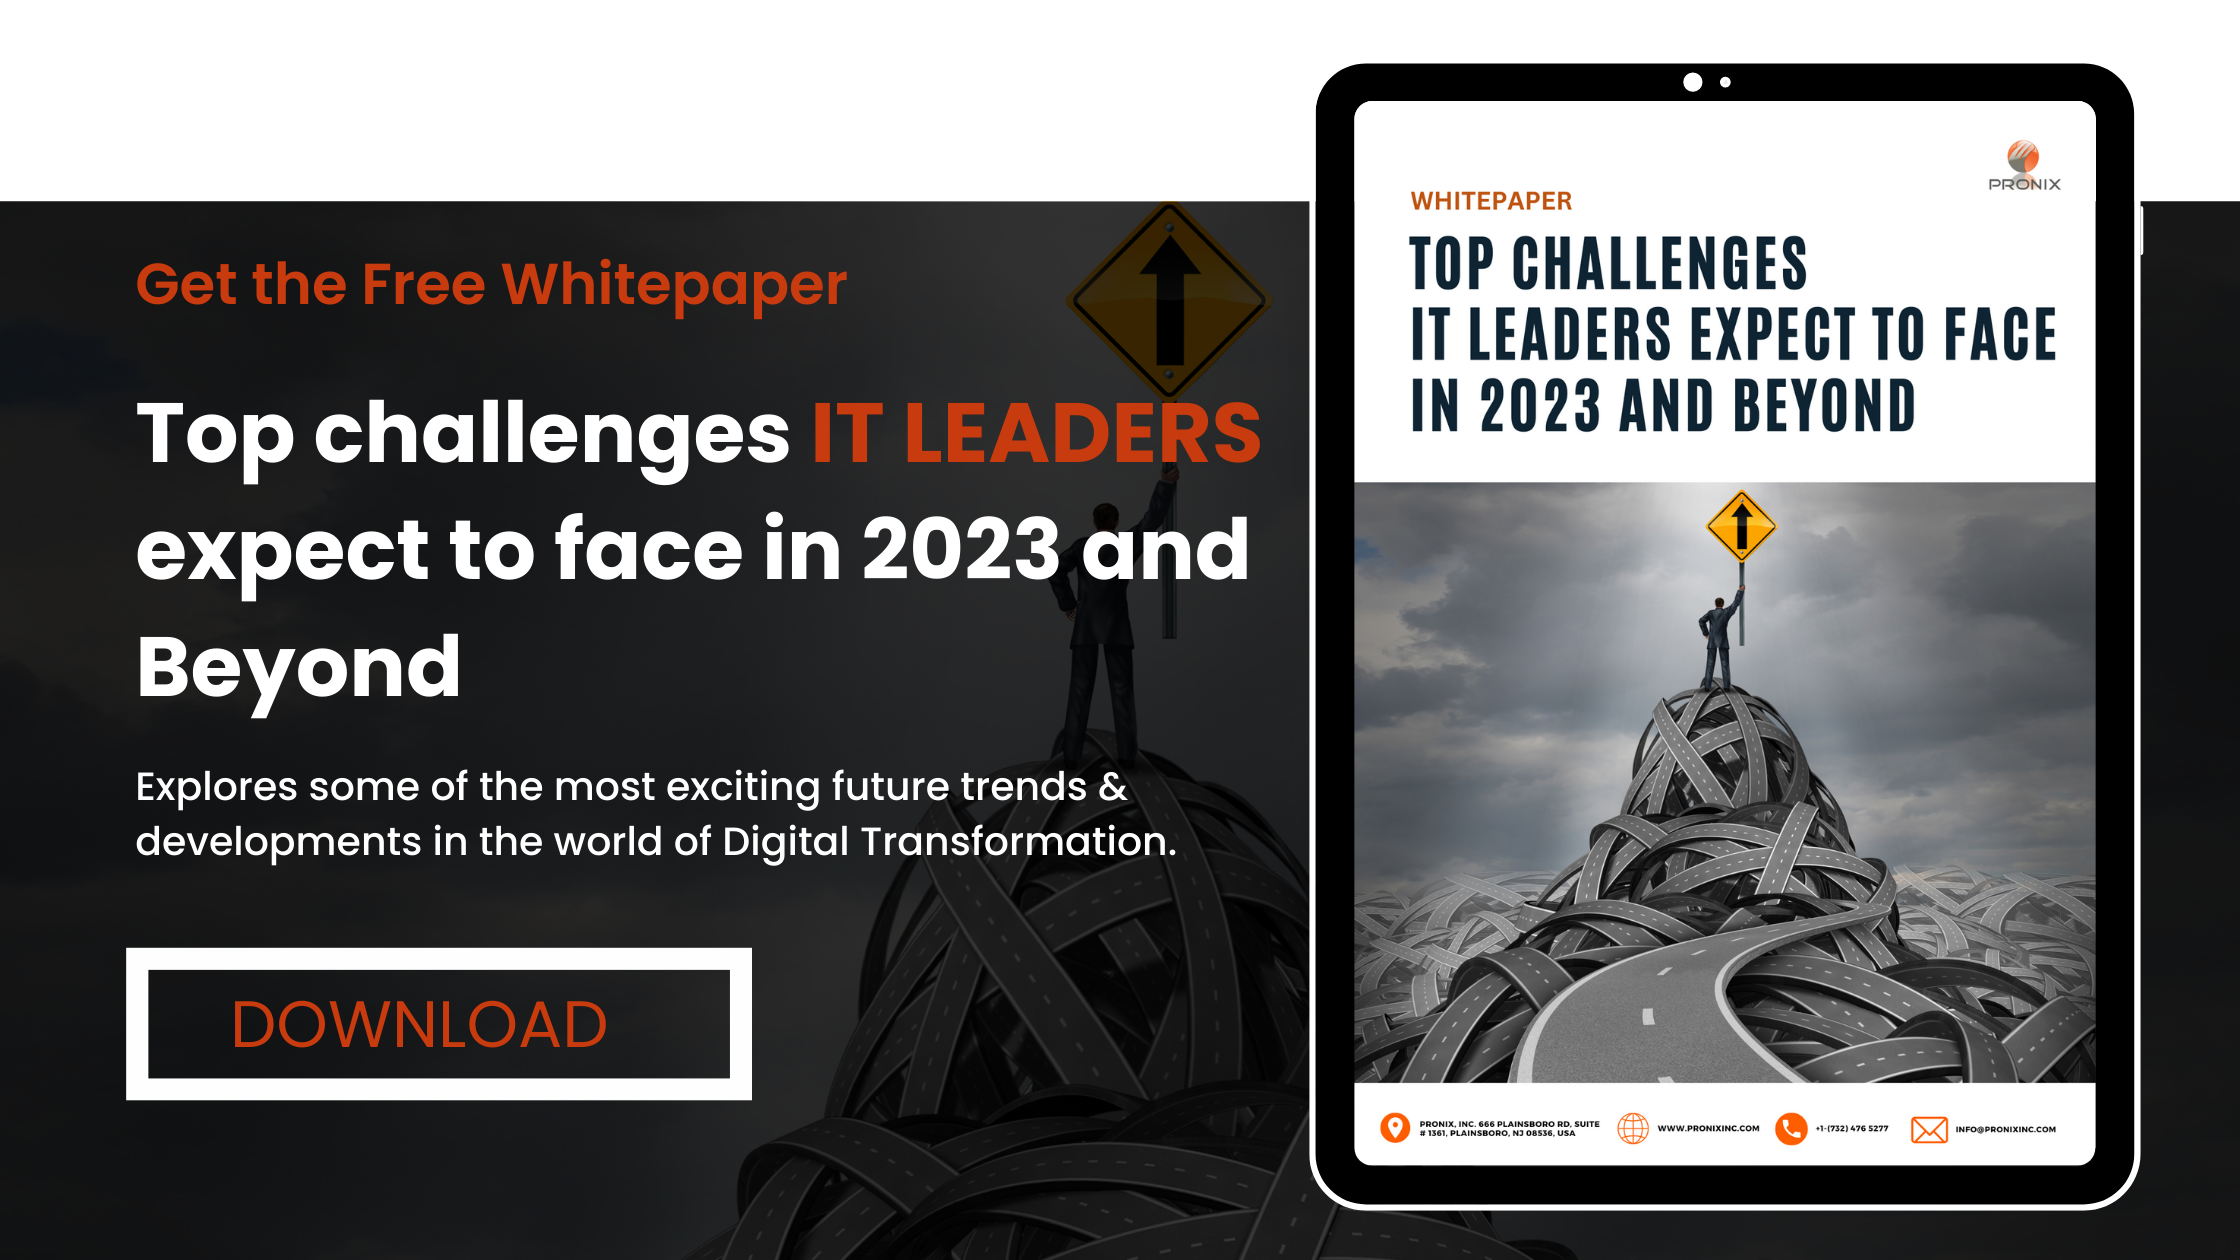 Top challenges IT Leaders expect to face in 2023 and Beyond